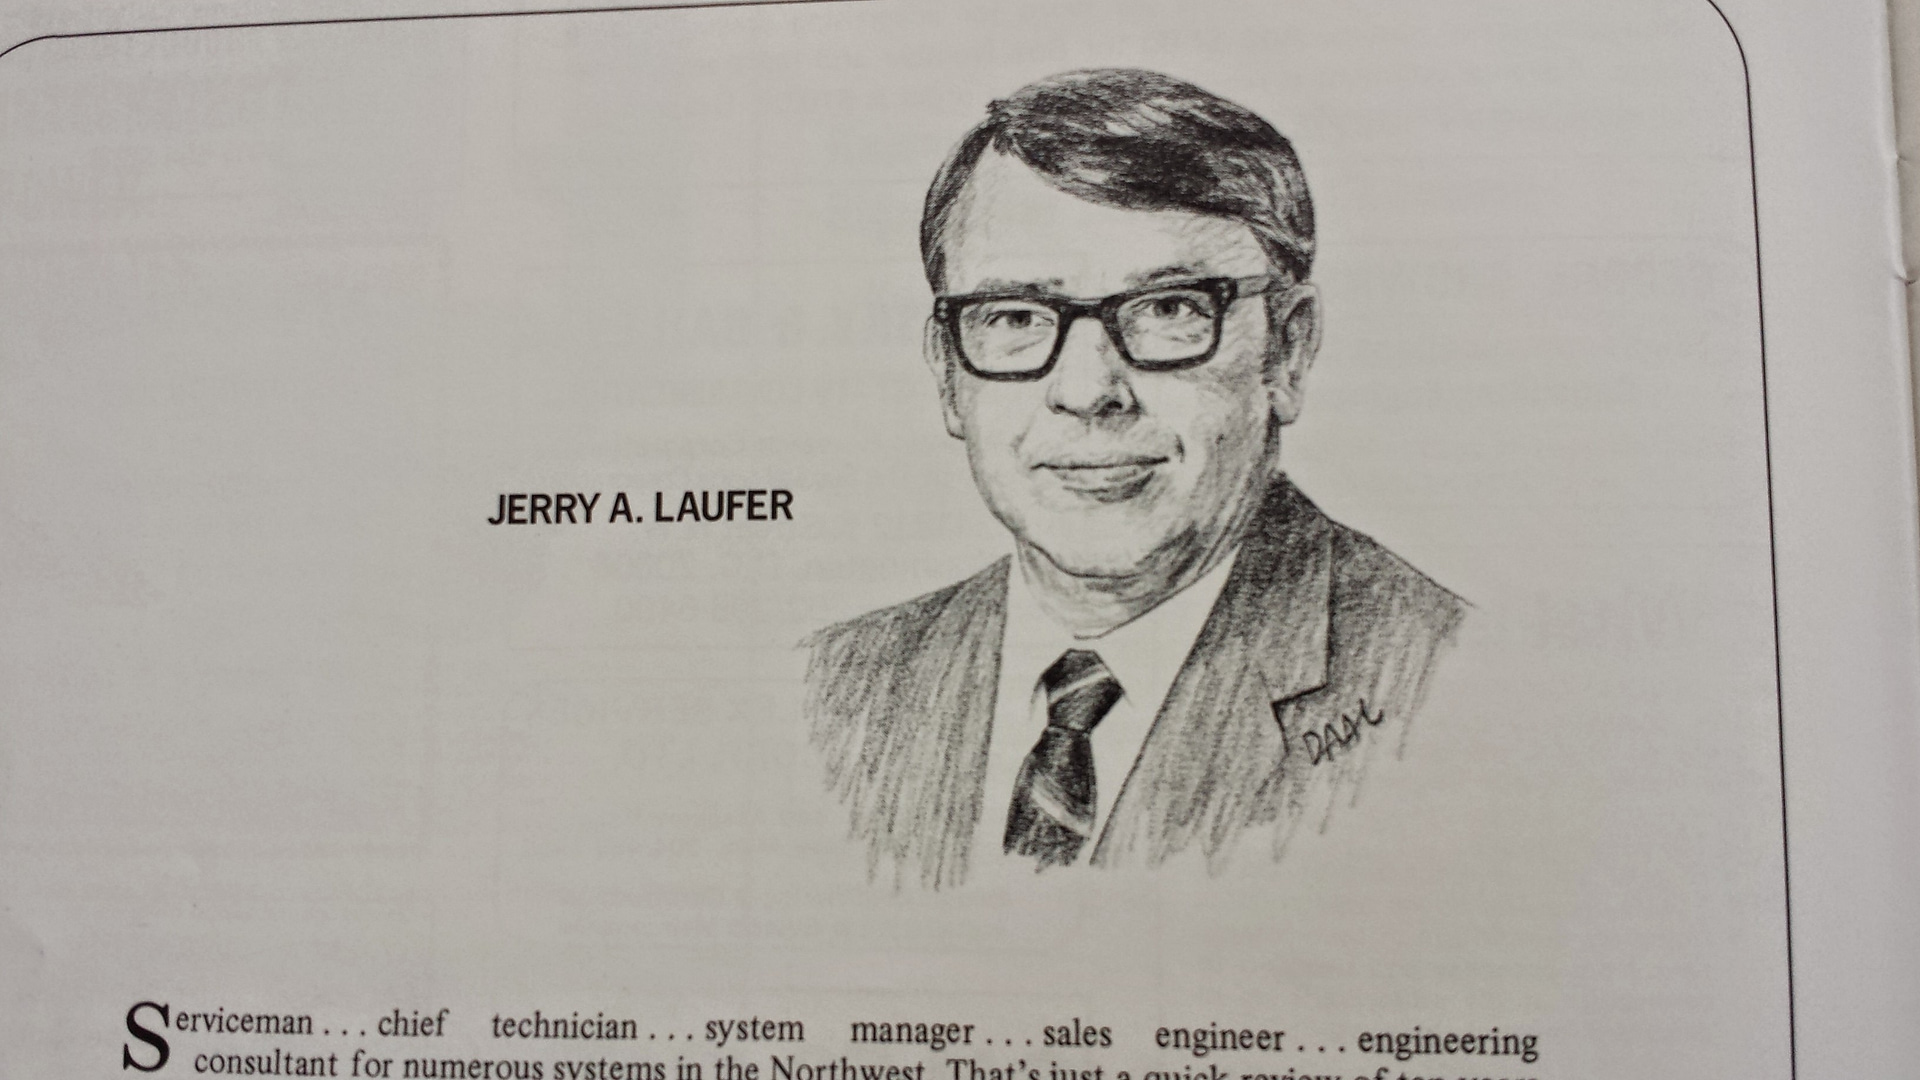 Pencil drawing of Jerry Laufer from a cable magazine profile.